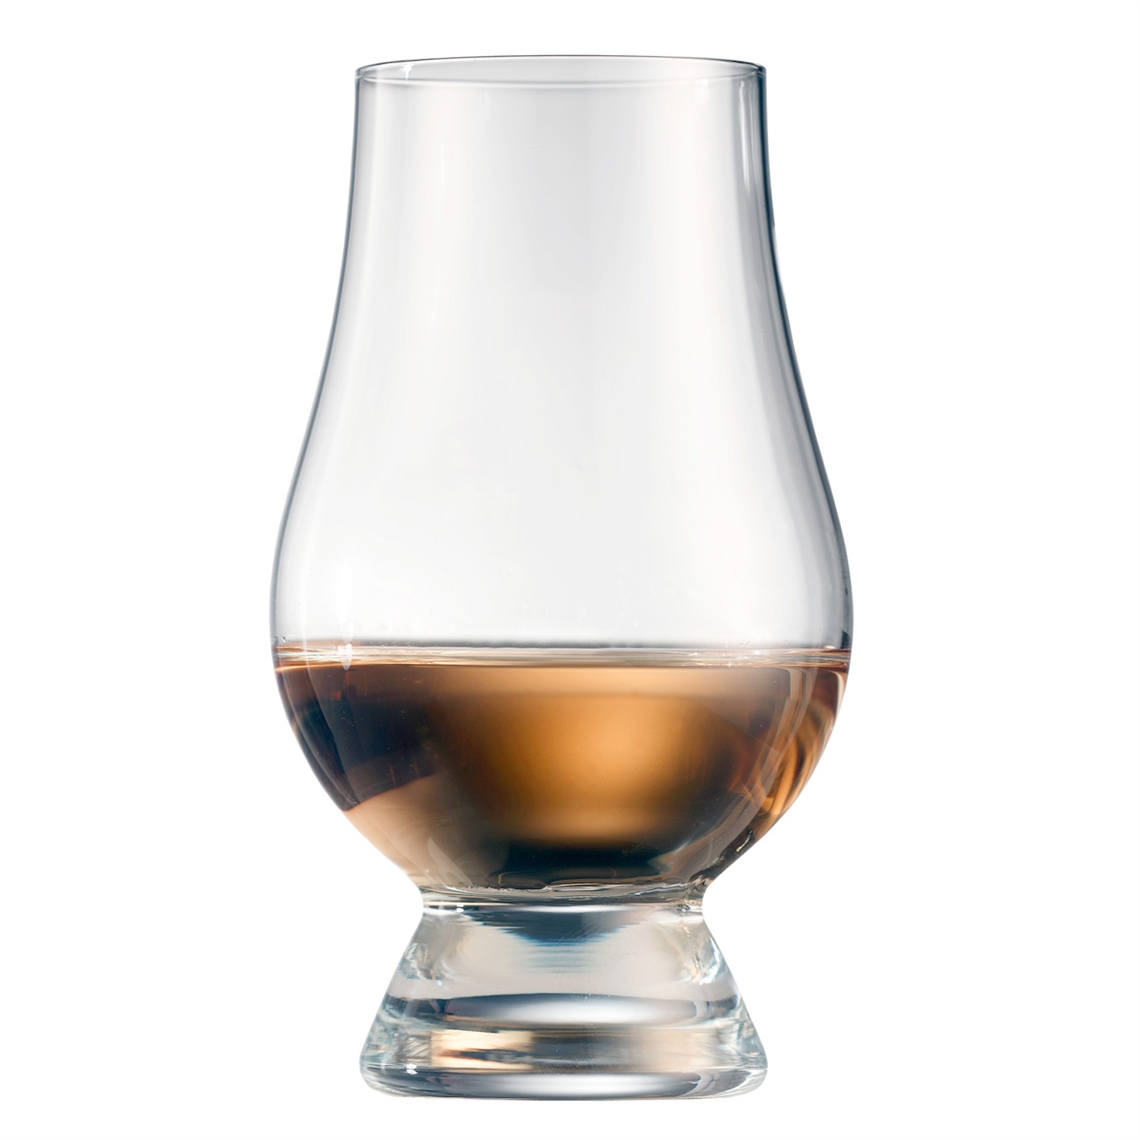 View more glass and co from our Whisky Glasses range